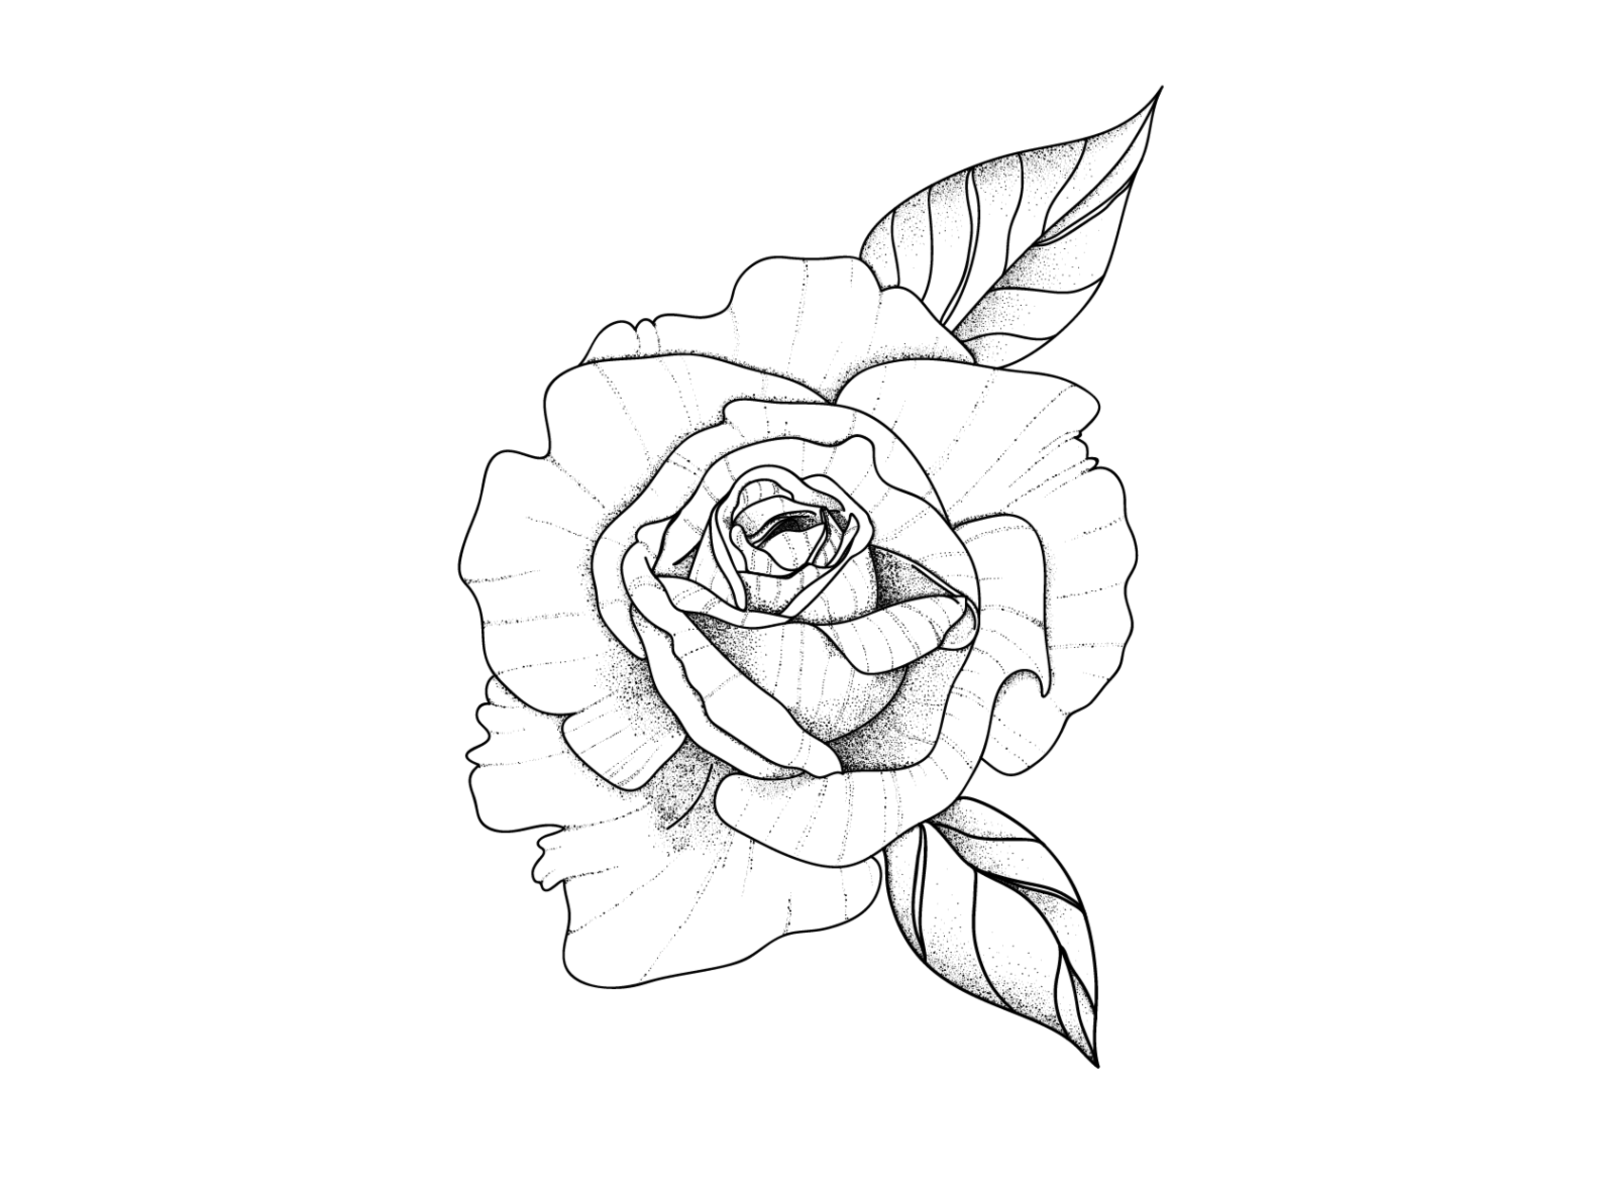 Dribbble - rose with shadowing Dribbble300-01.png by Rachel Denny